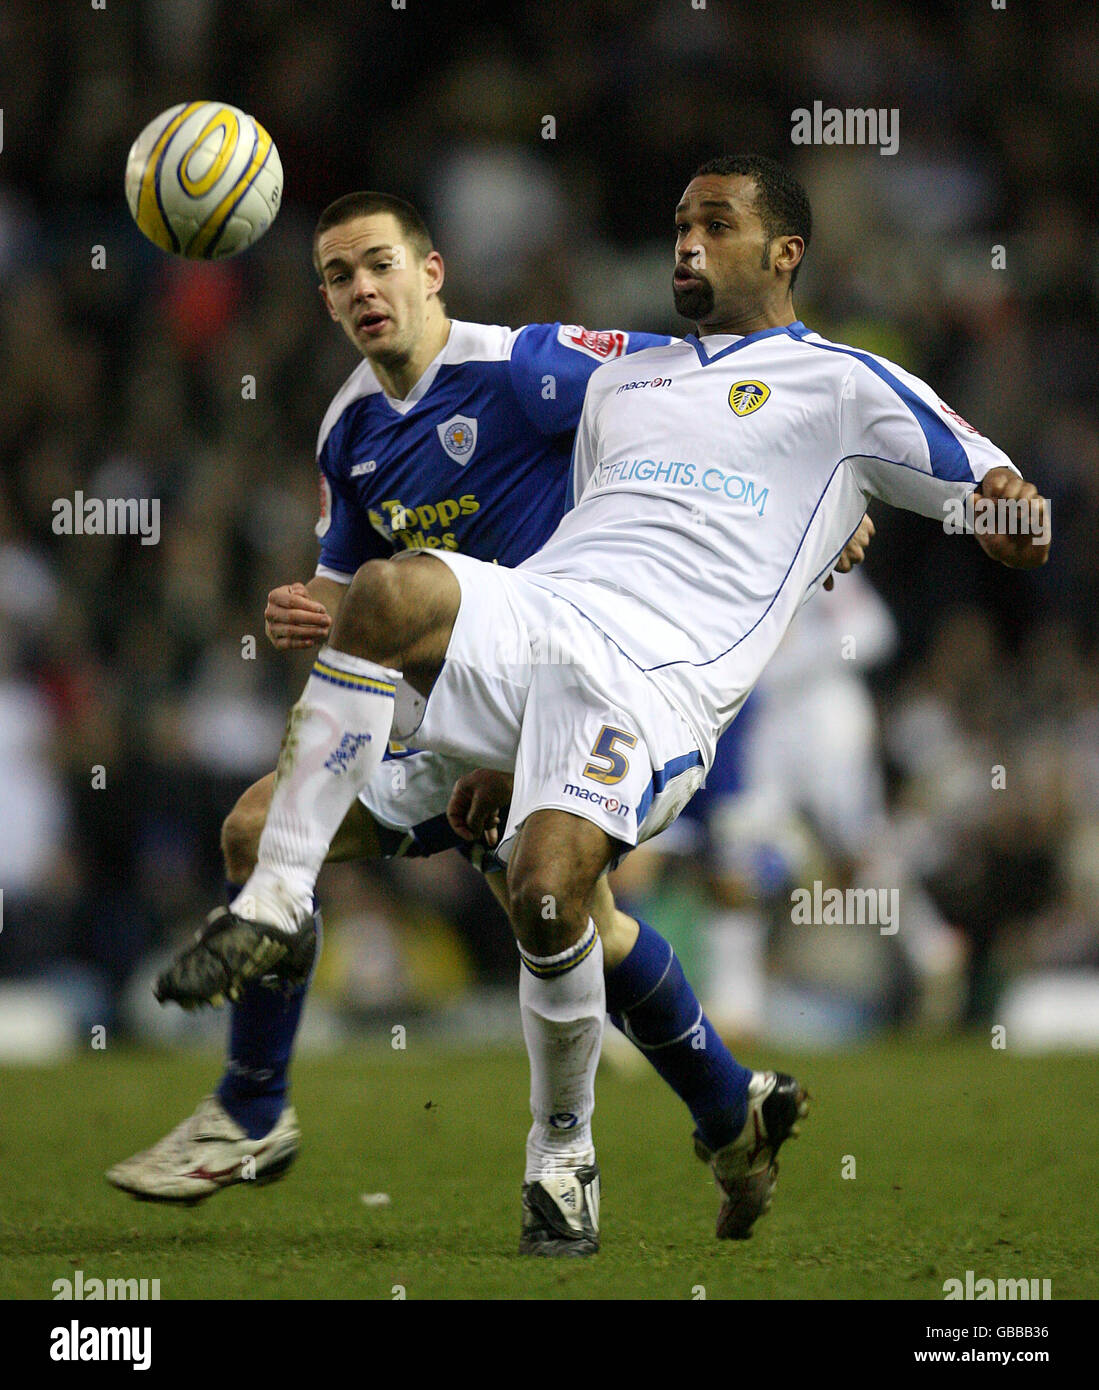 Leeds United's Rui Marques and Leicester City's Matt Fryatt (behind) battle for the ball during the Coca-Cola League One match at Elland Road, Leeds. Stock Photo